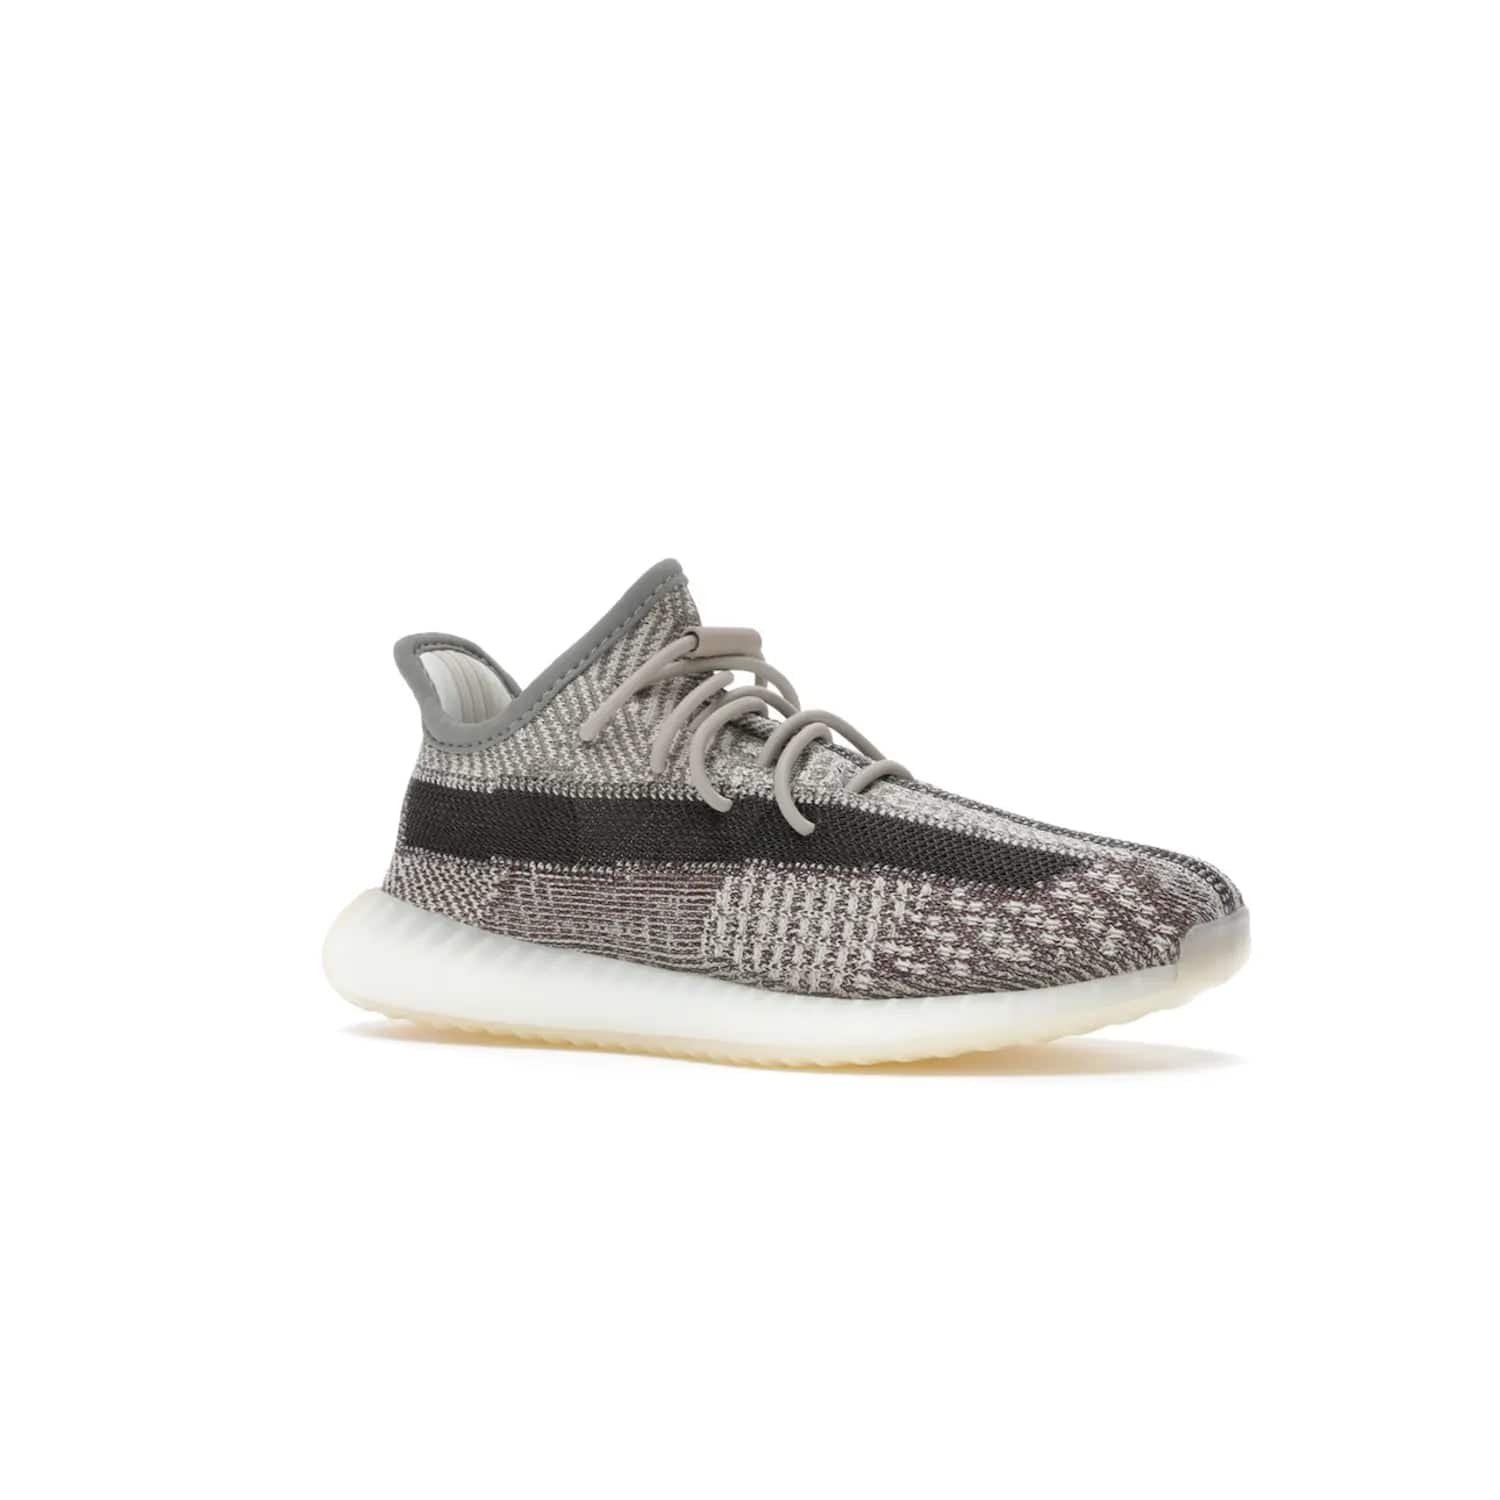 adidas Yeezy Boost 350 V2 Zyon (Kids) - Image 4 - Only at www.BallersClubKickz.com - The adidas Yeezy Boost 350 V2 Zyon (Kids) - perfect pick for fashion-savvy kids. Features soft Primeknit upper, lace closure & colorful patterning. Comfort & style for kids' summer outfits!